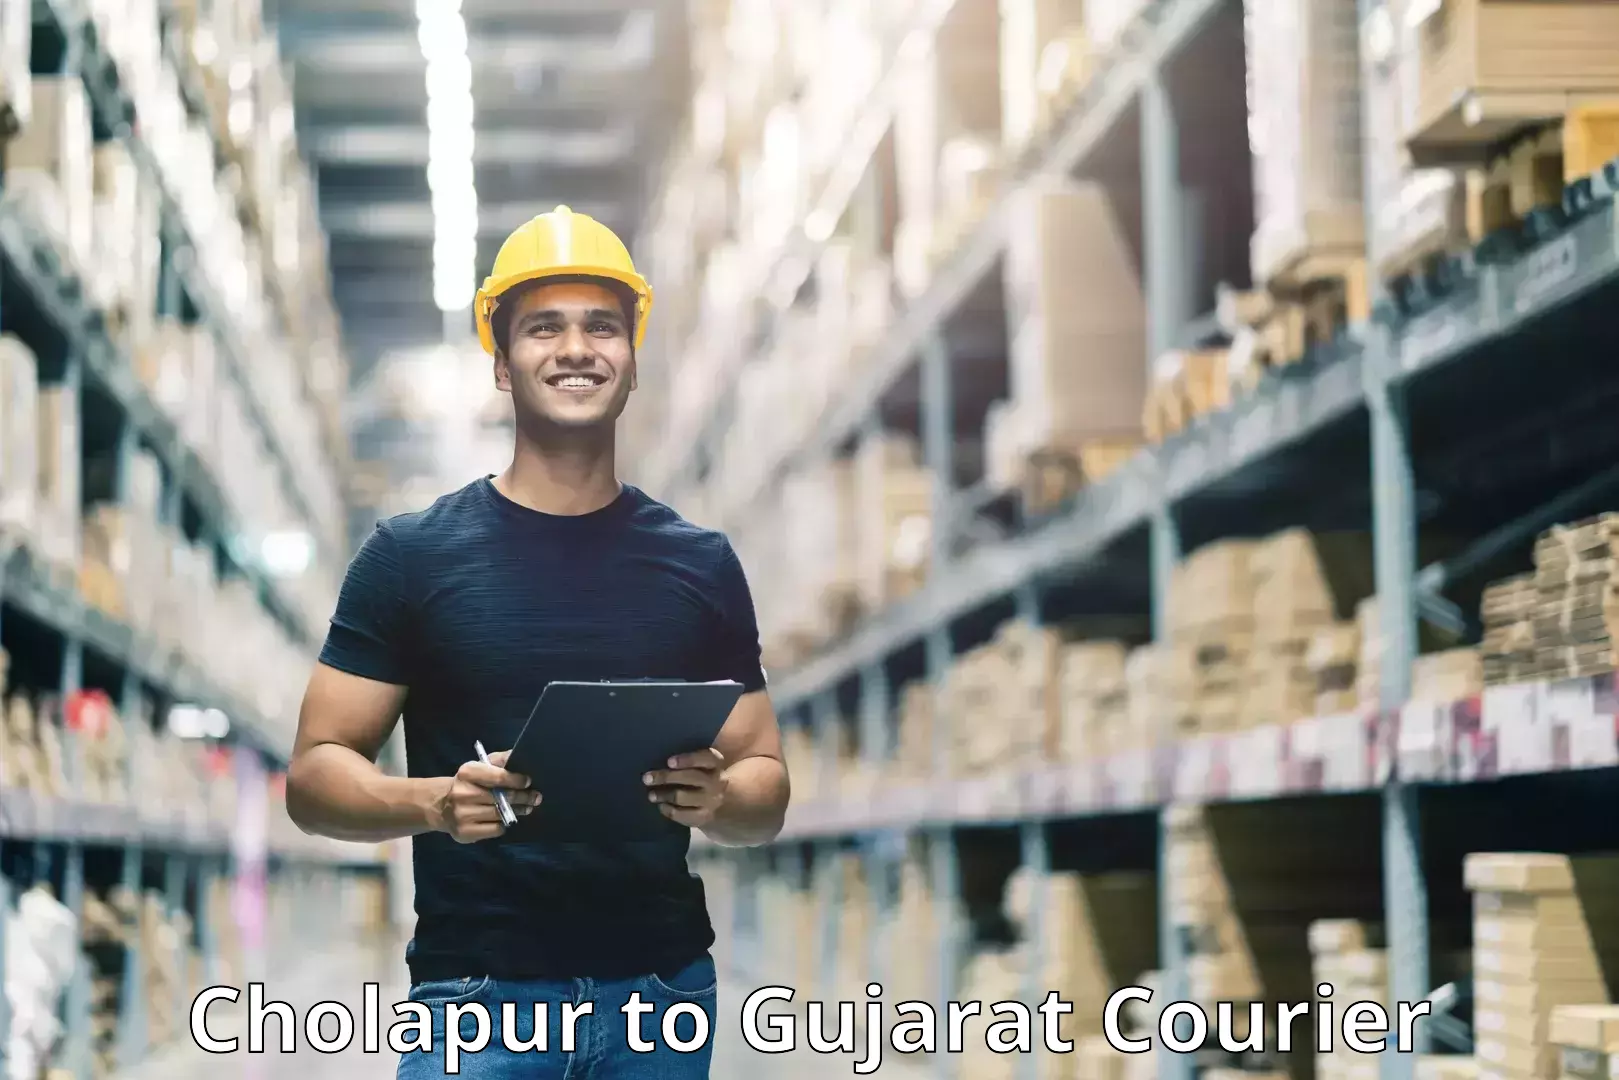 Advanced delivery network Cholapur to Gujarat